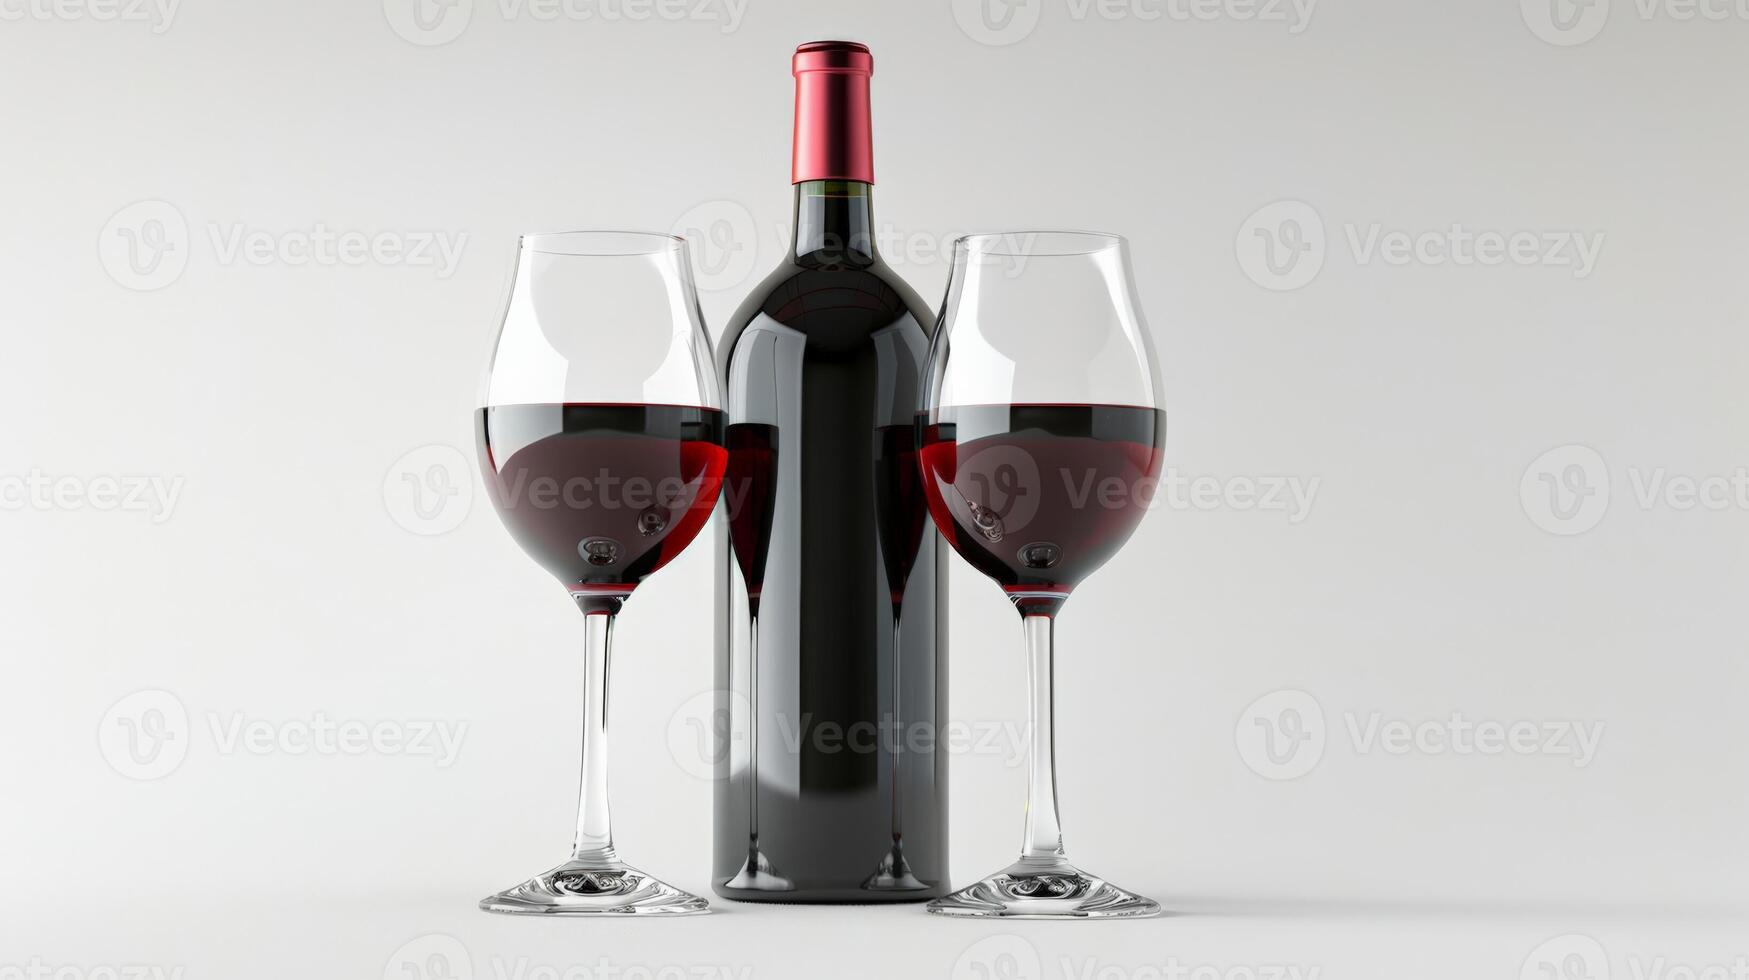 Elegant red wine bottle with two glasses, isolated on white background photo